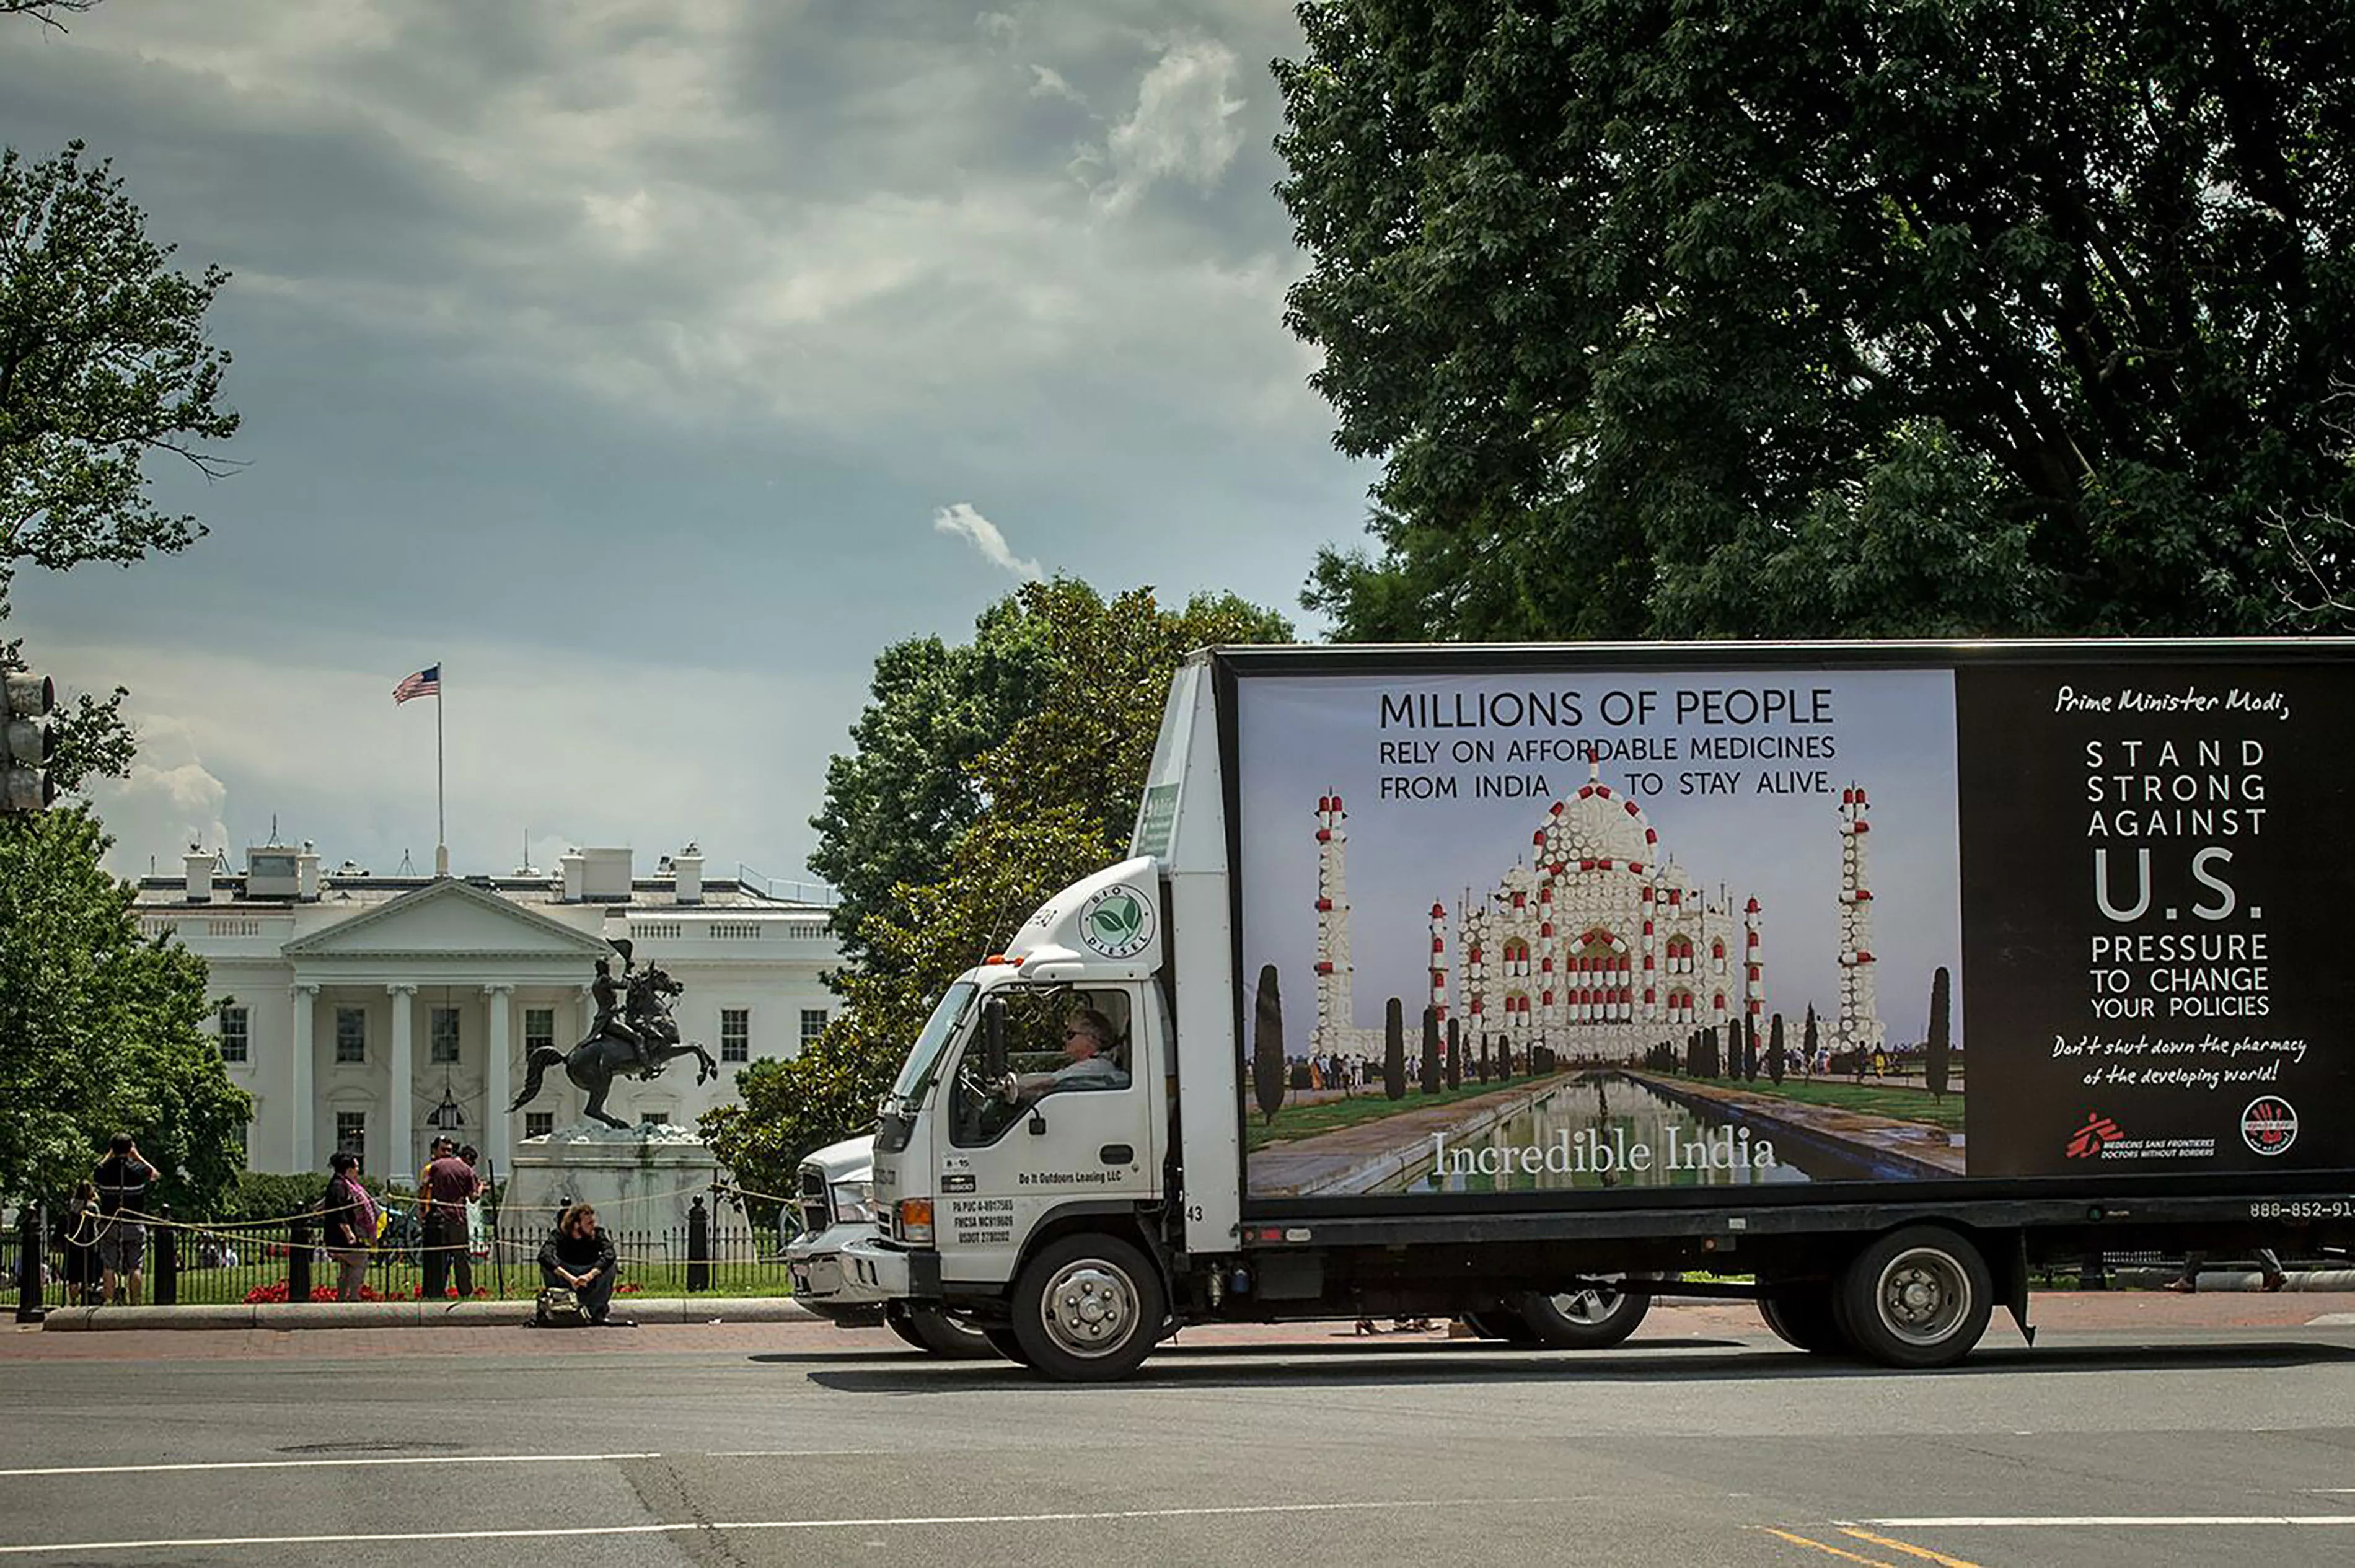 Incredible India truck in front of Whitehouse